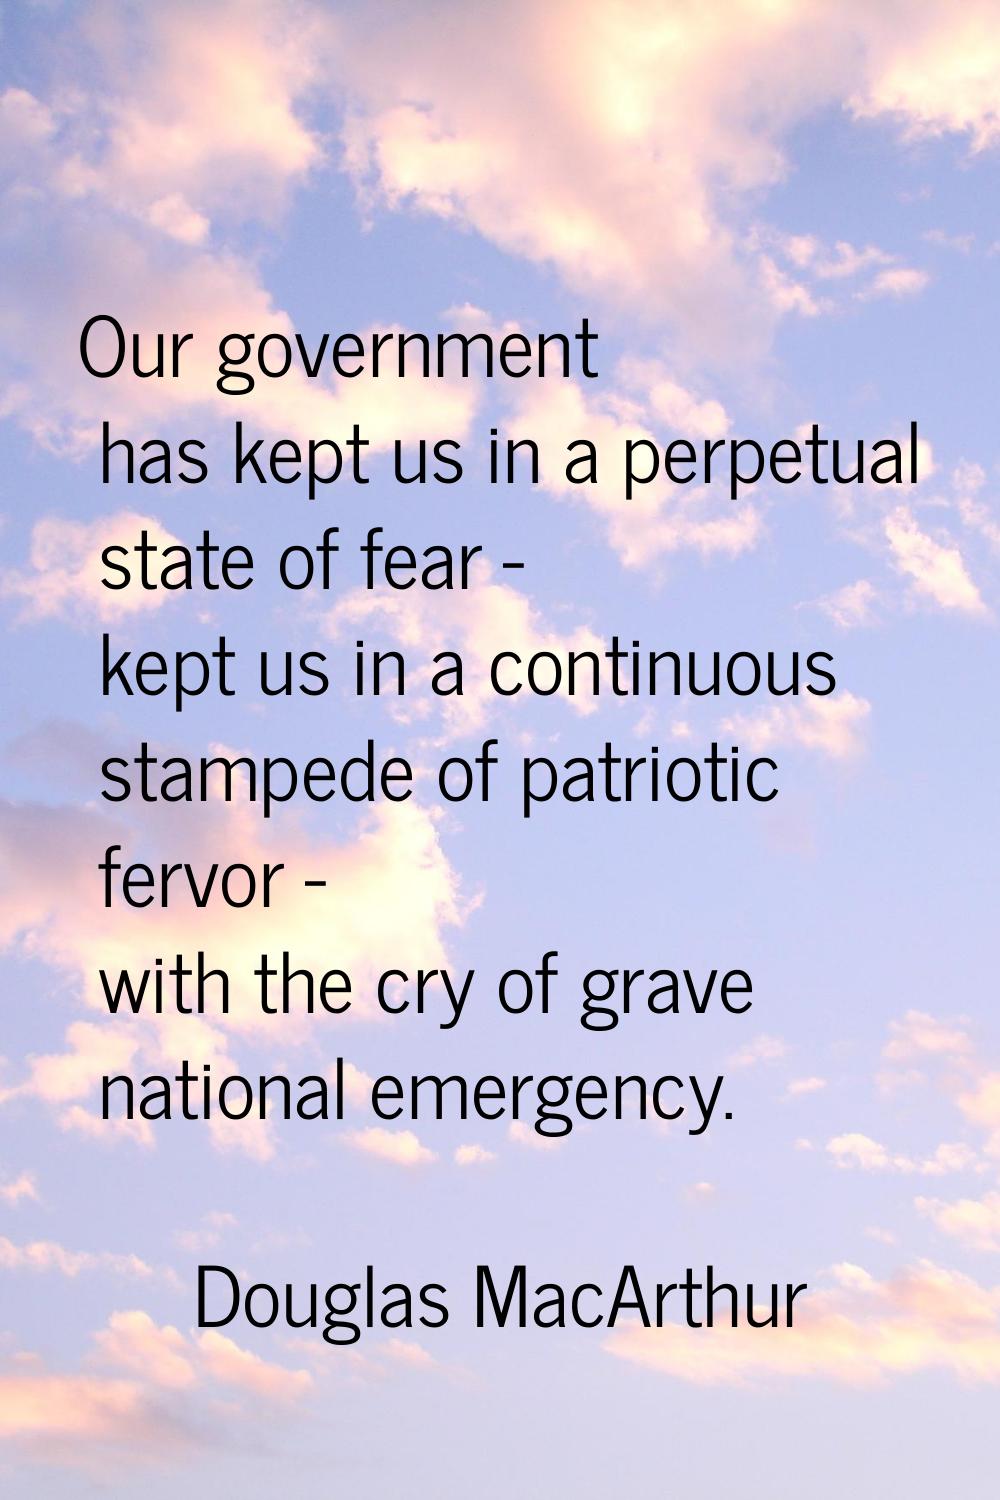 Our government has kept us in a perpetual state of fear - kept us in a continuous stampede of patri